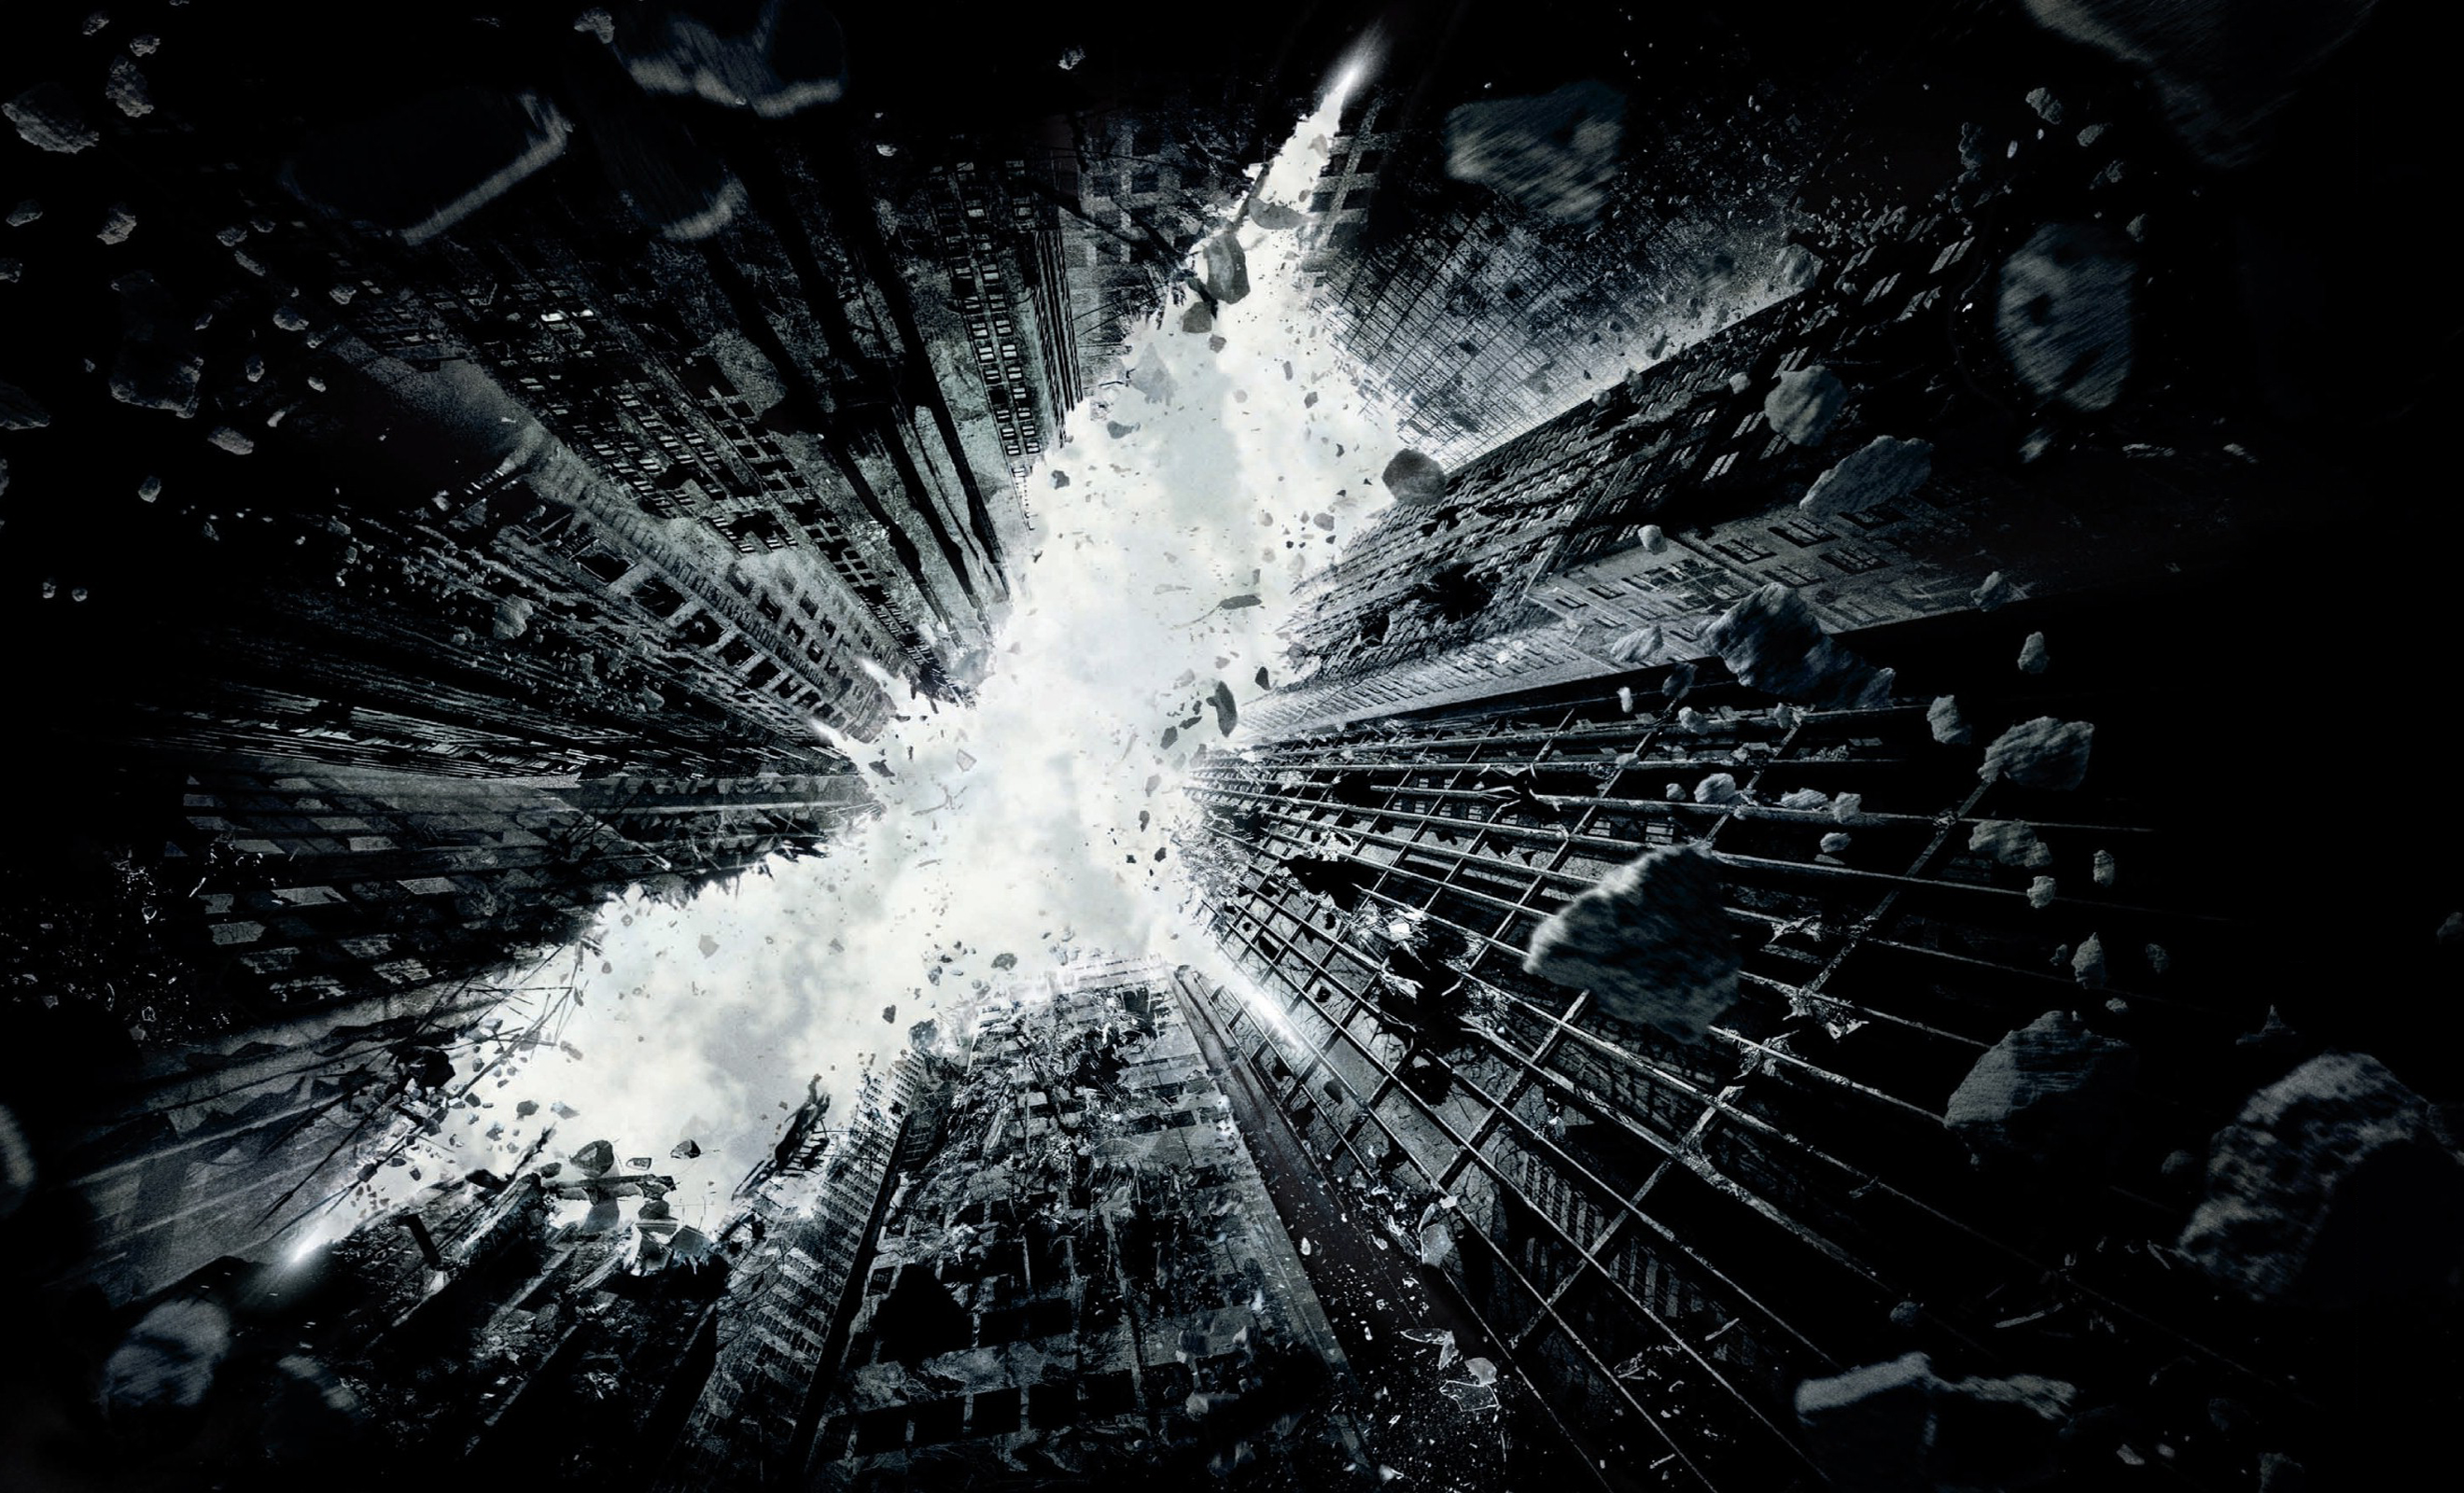 The Dark Knight Rises First Wallpaper Poster   Movie Wallpapers